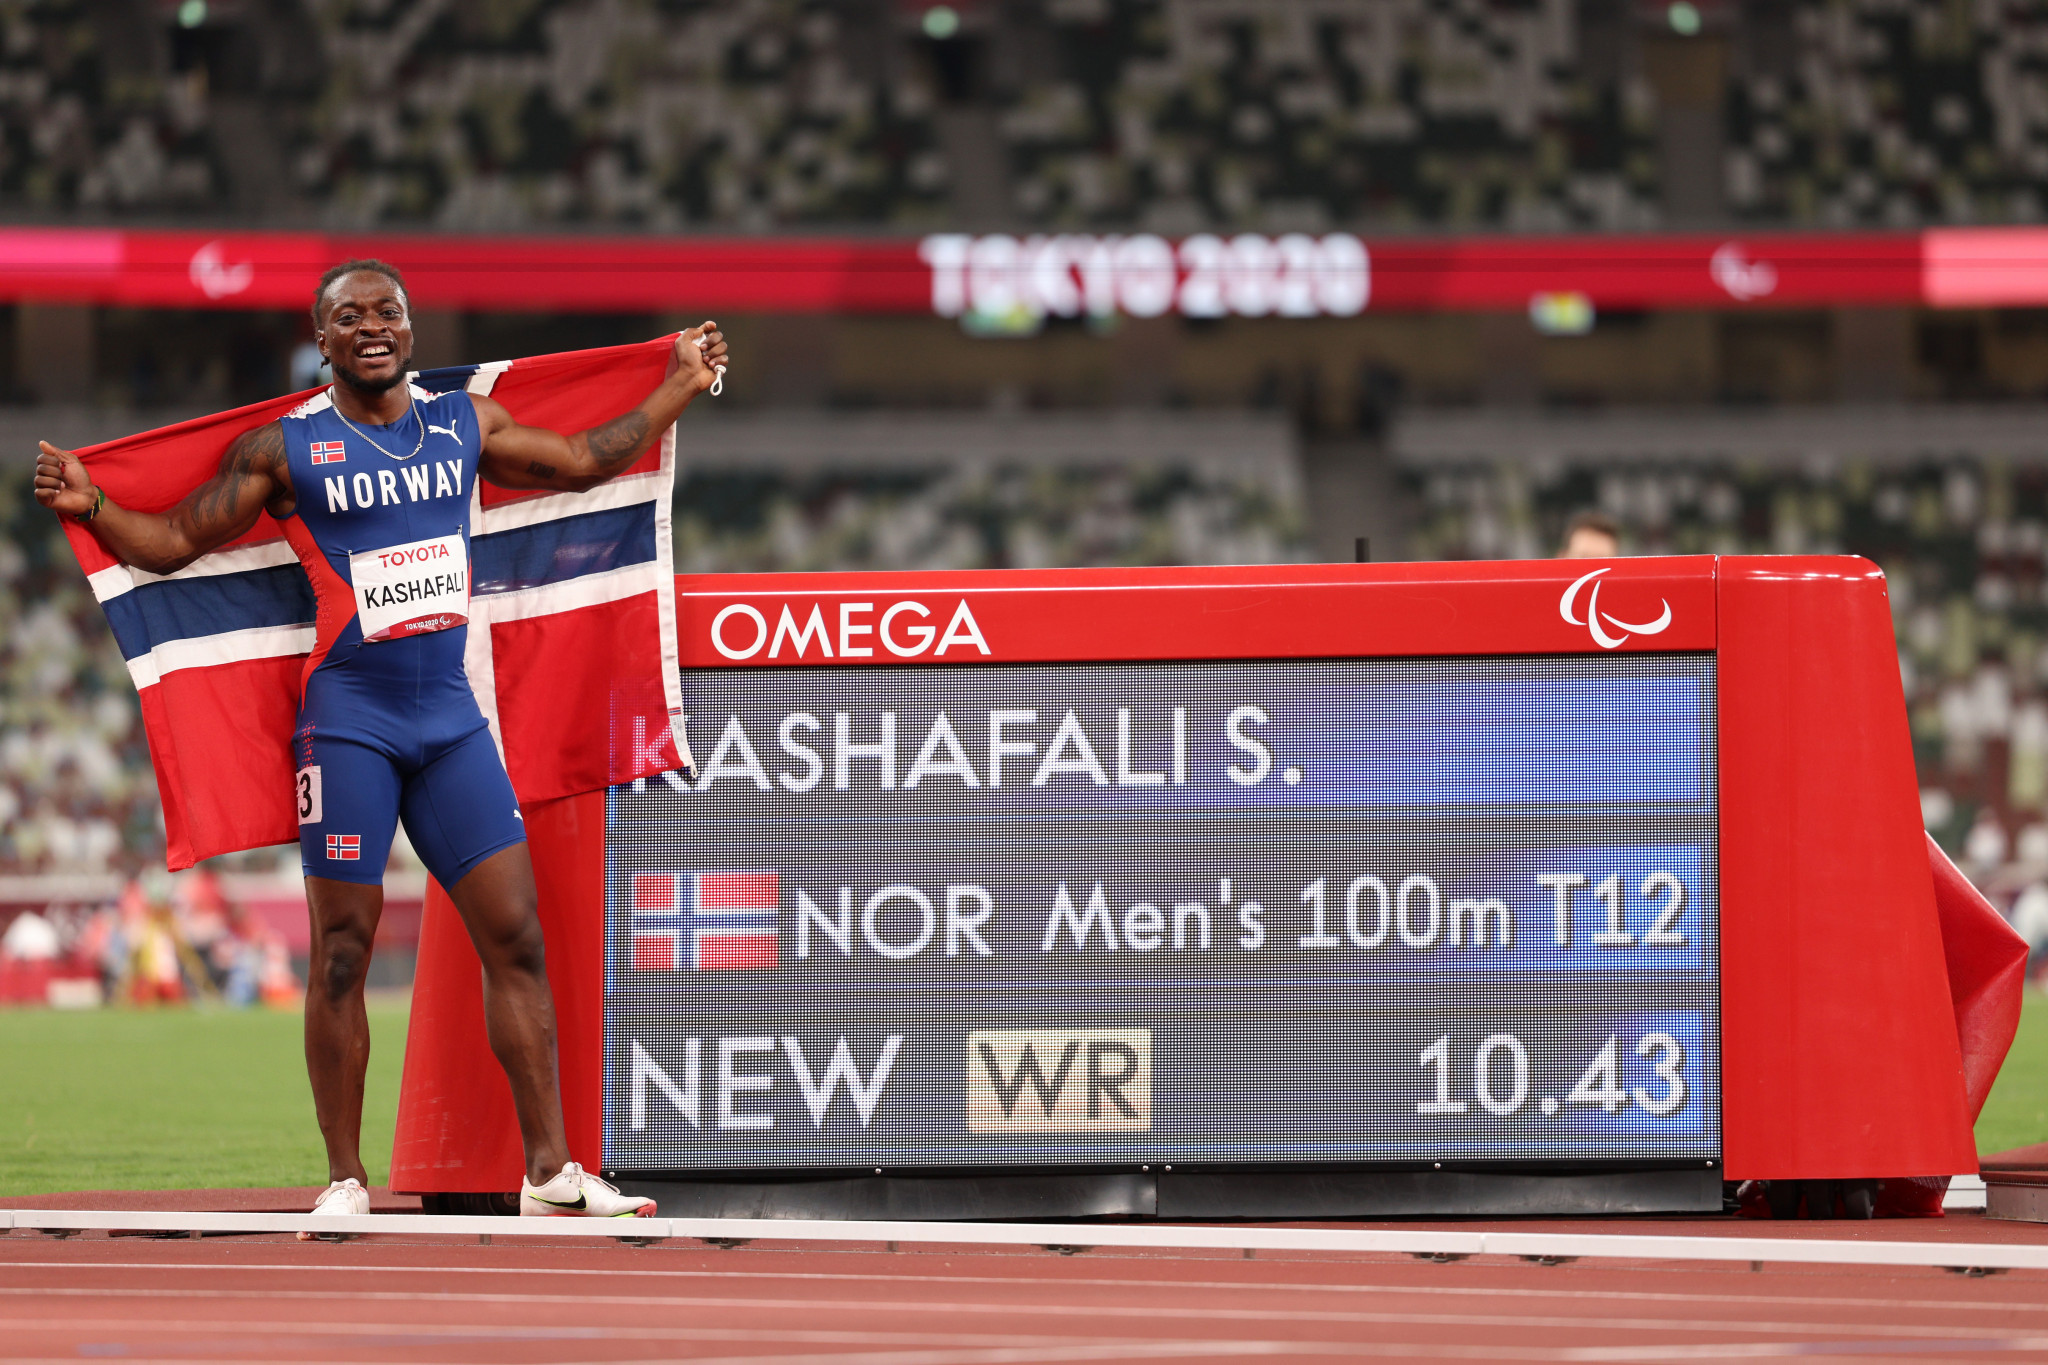 Norway's Salum Ageze Kashafali ended the athletics action on day five of the Tokyo 2020 Paralympics to win gold with a sensational world record of 10.43sec in the men's 100 metres T12 ©Getty Images